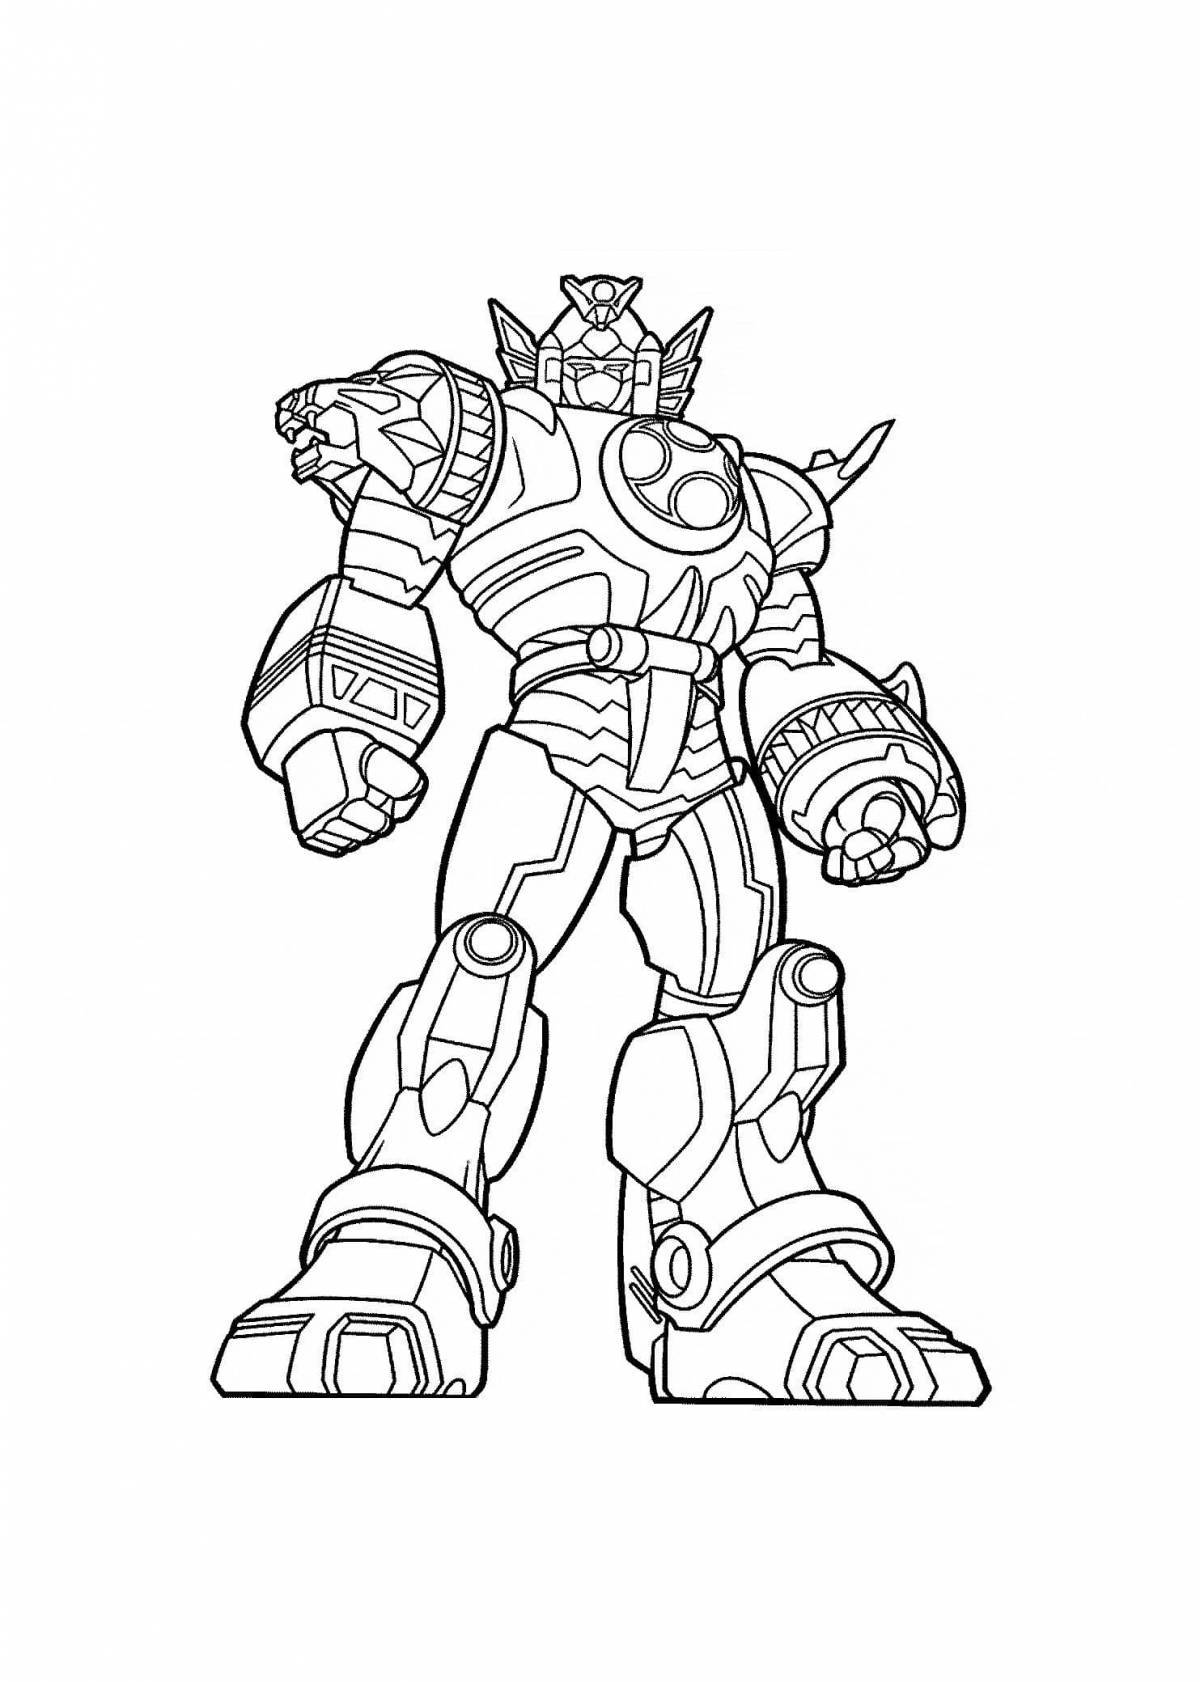 Amazing robot coloring page for boys